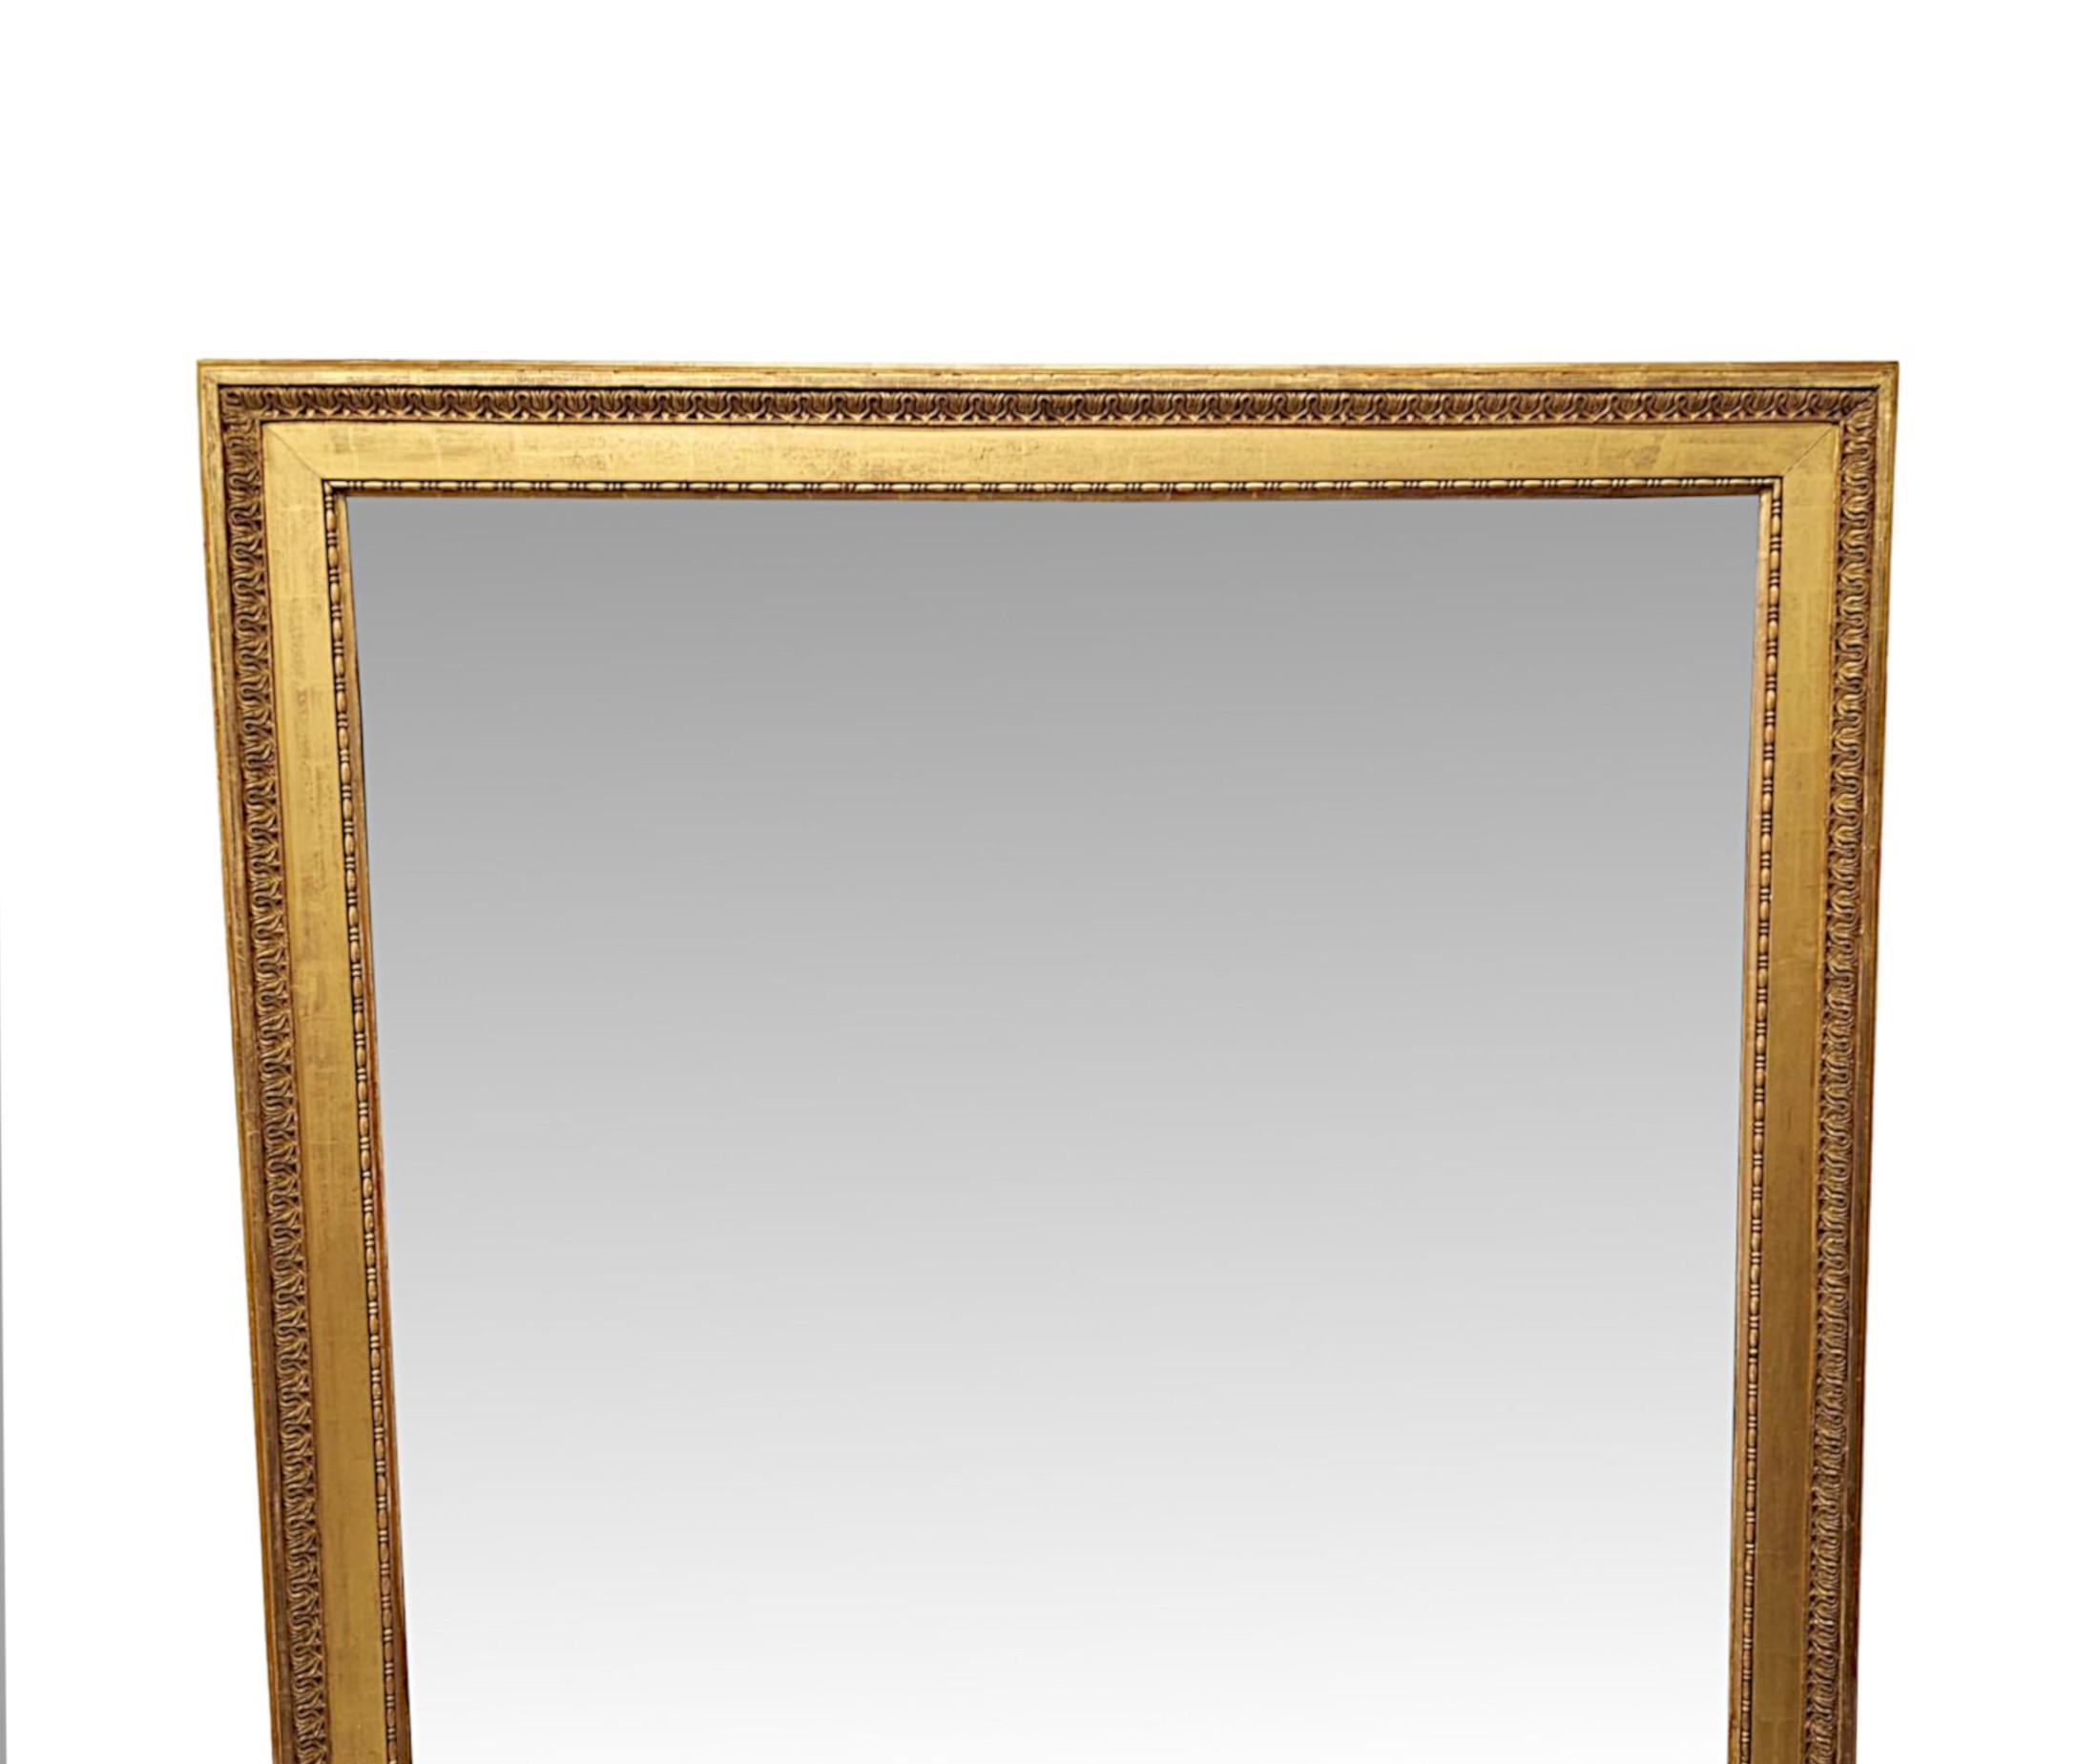 A very fine 19th Century giltwood overmantel mirror of impressively large proportions and exceptional quality.  The mirror glass plate of rectangular form is set within a fabulously hand carved and beautifully simple, fluted and moulded giltwood